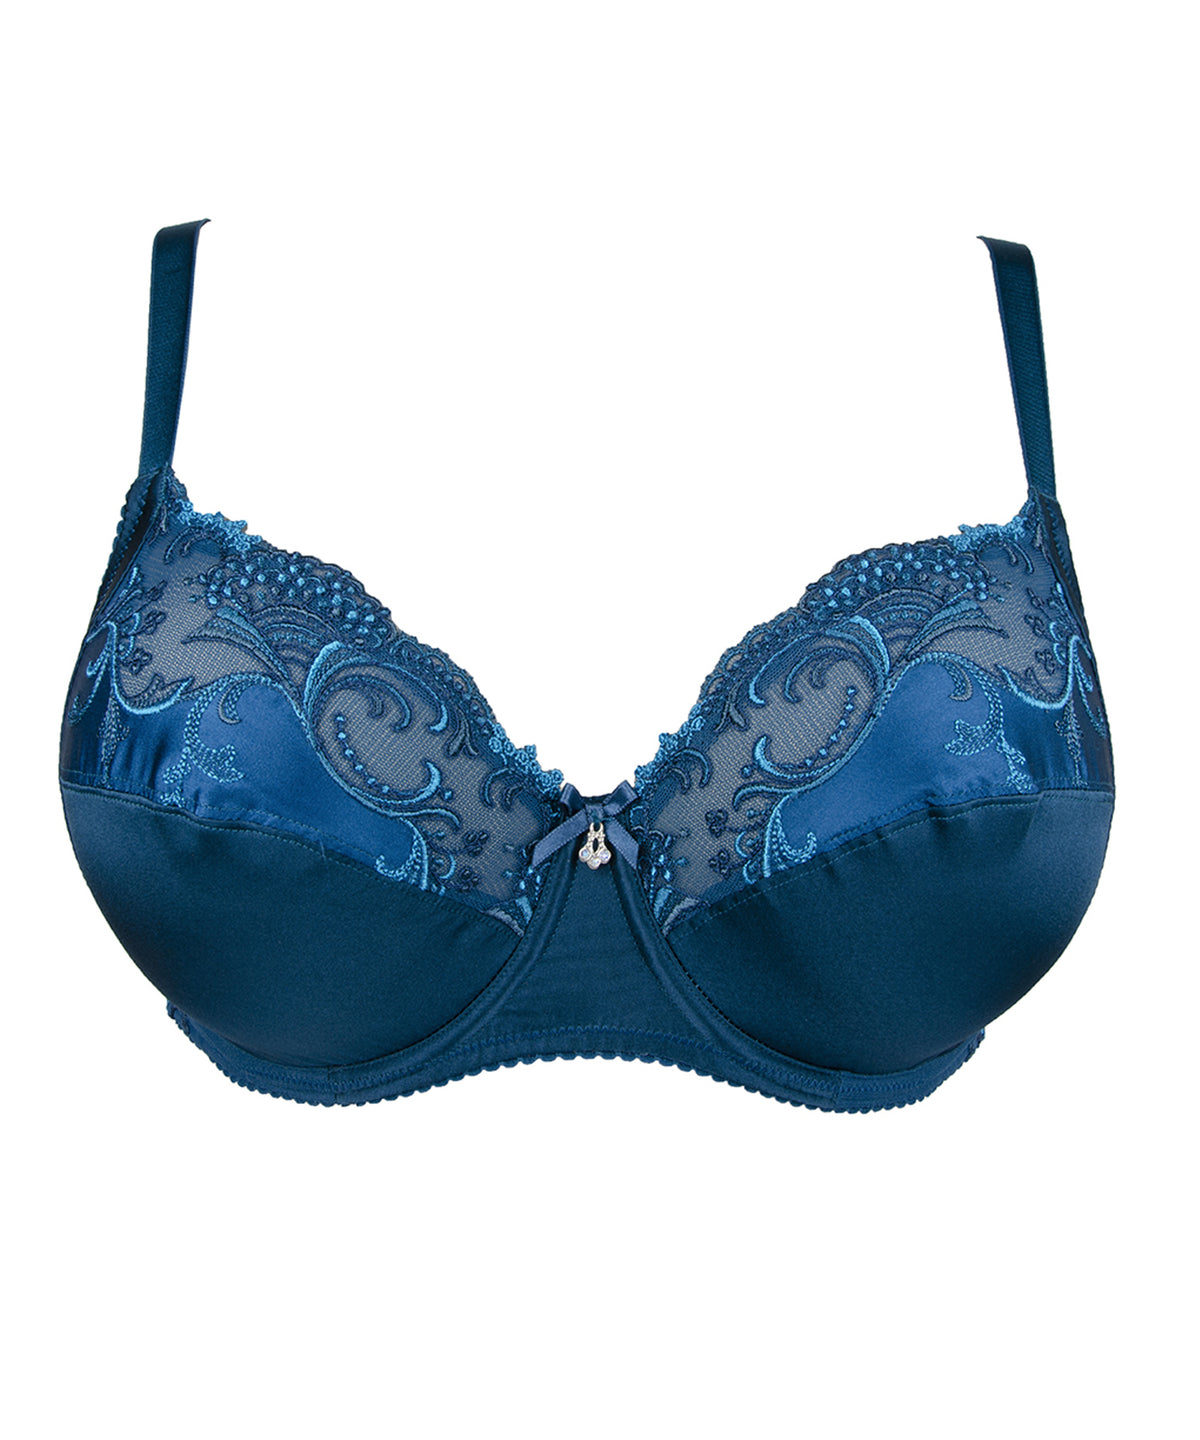 Comparing a 32H with 34H in Panache Andorra Full Cup Bra (5675)